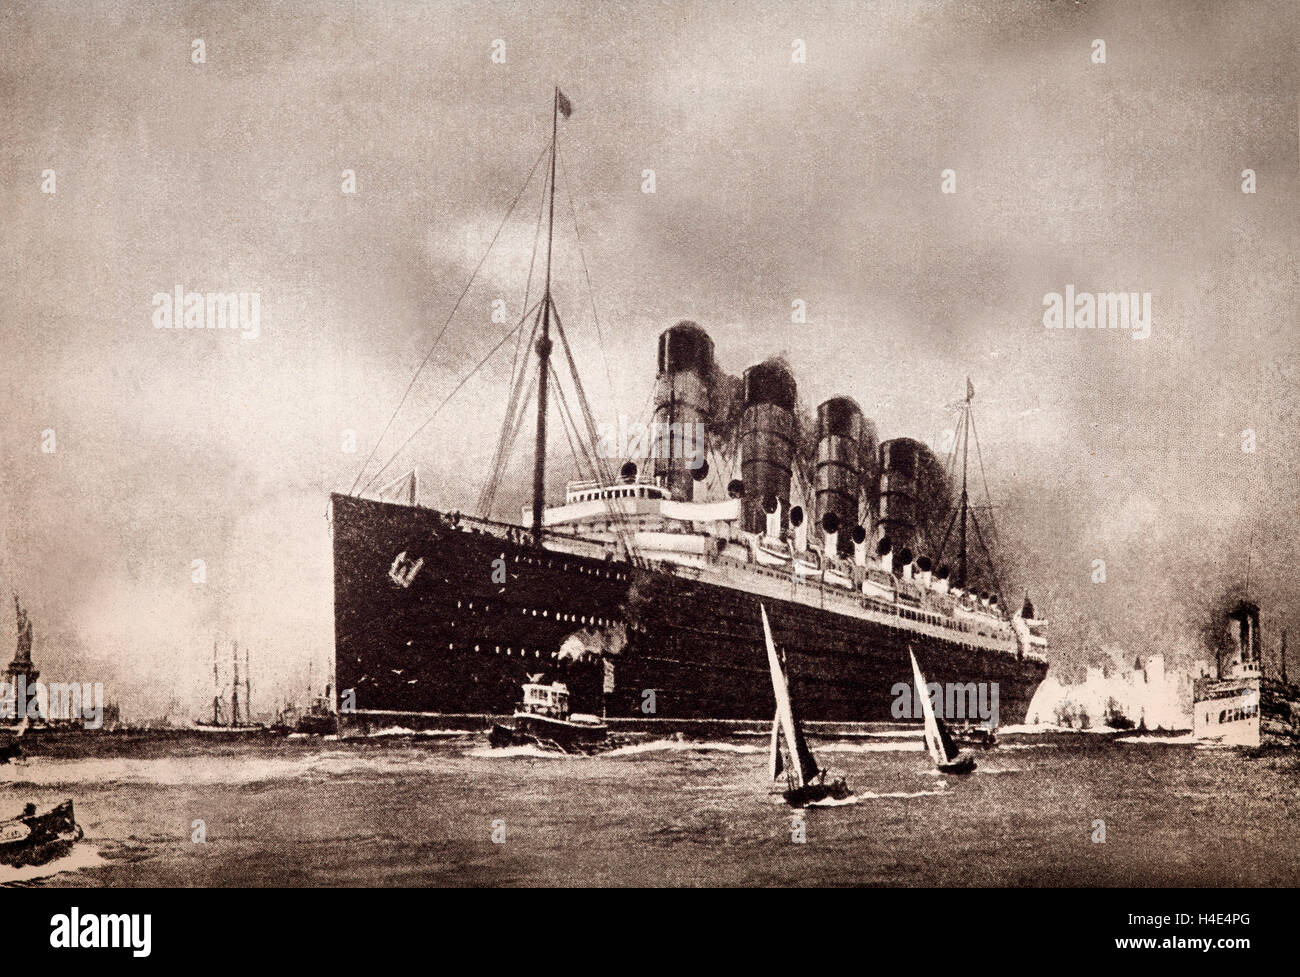 The Cunard liner RMS Lusitania was briefly the world's largest passenger ship. It was sunk by a German submarine off the south Irish coast on 7th May, 1915, causing a major diplomatic uproar that did much to bring the USA into the war. Stock Photo